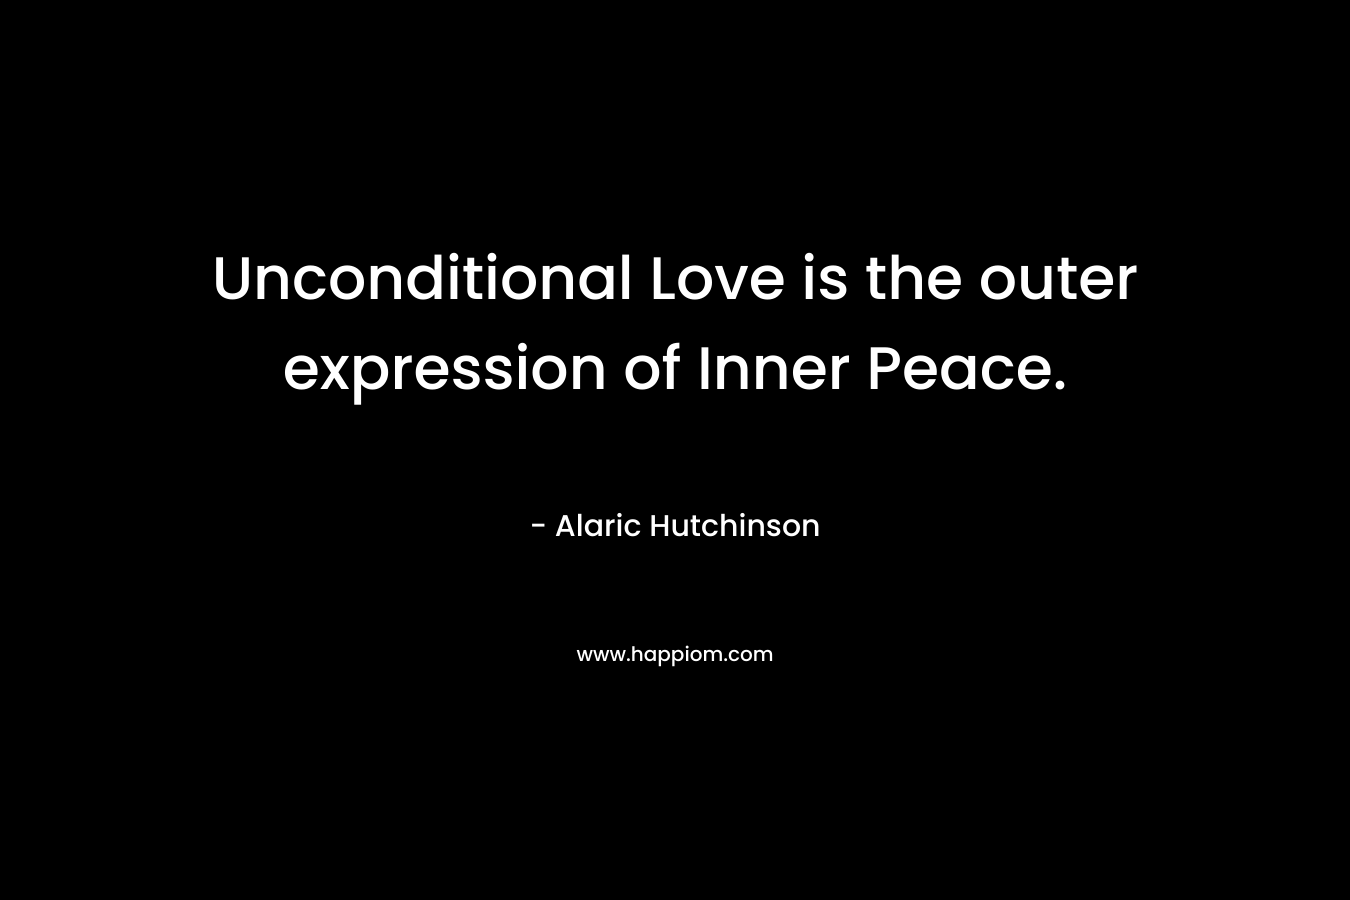 Unconditional Love is the outer expression of Inner Peace.